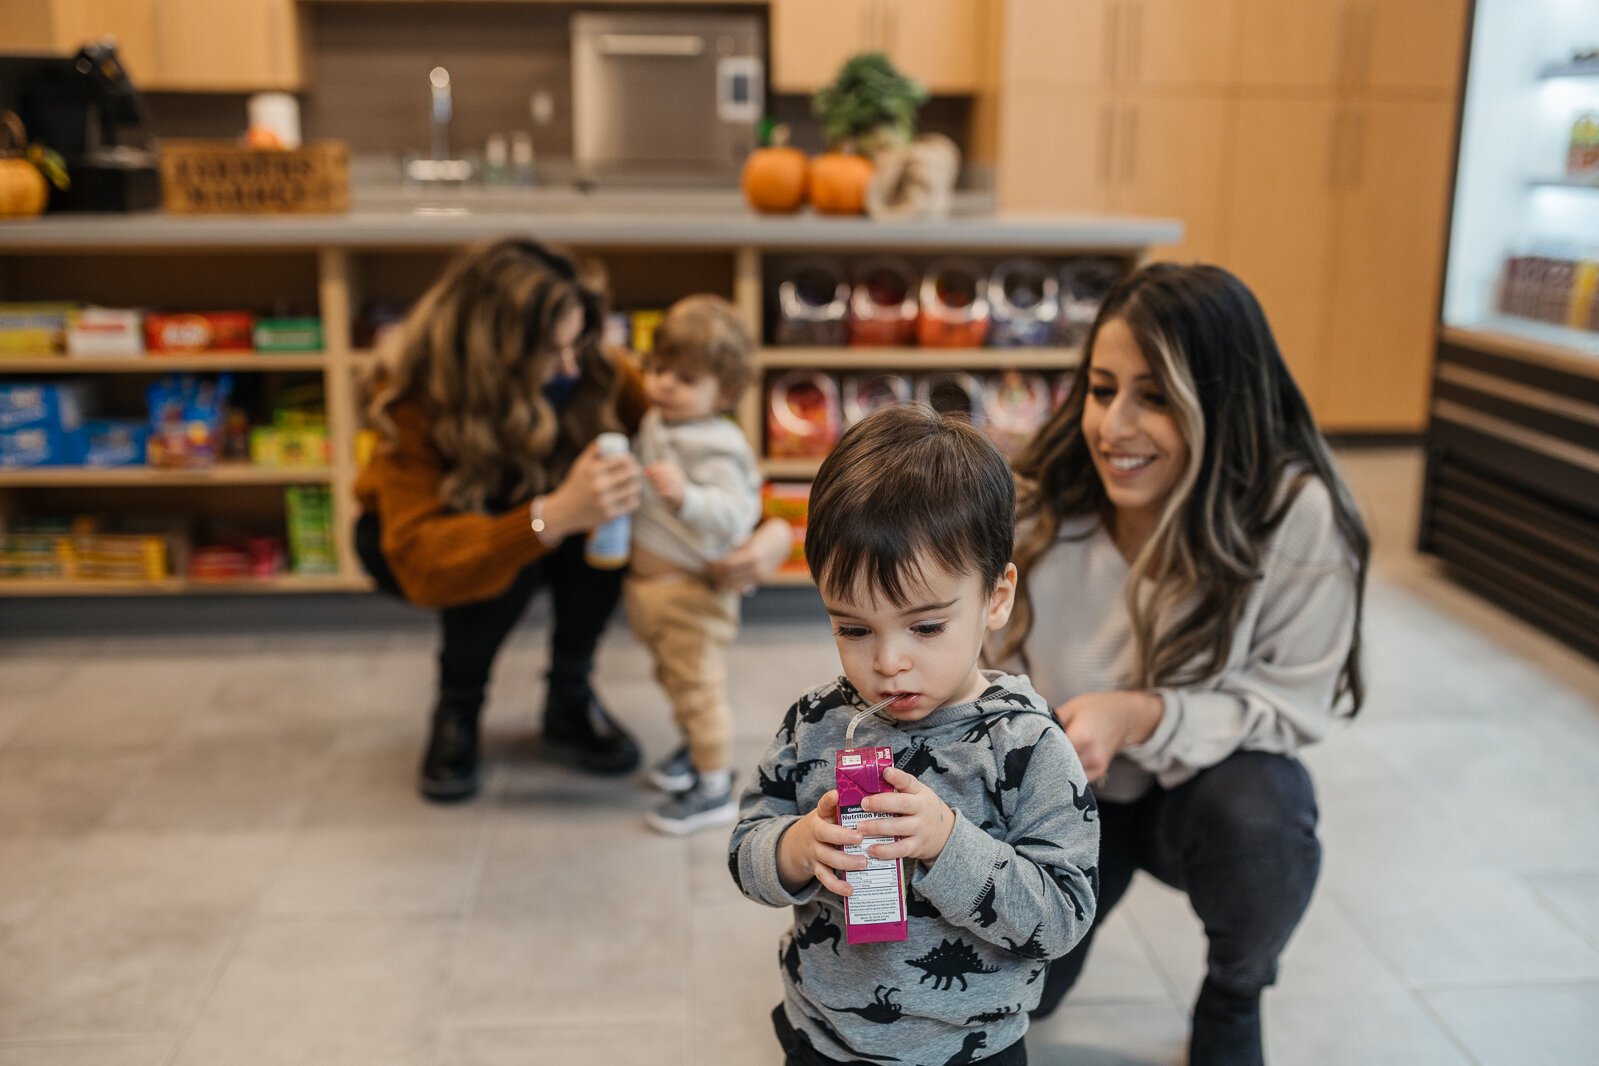 Maye Abdo, pictured here with son Levi in the forefront, started a virtual support group for new moms during the COVID-19 pandemic. Some of the group’s members now meet on Friday afternoons at the Chaldean Community Foundation in Sterling Heights.